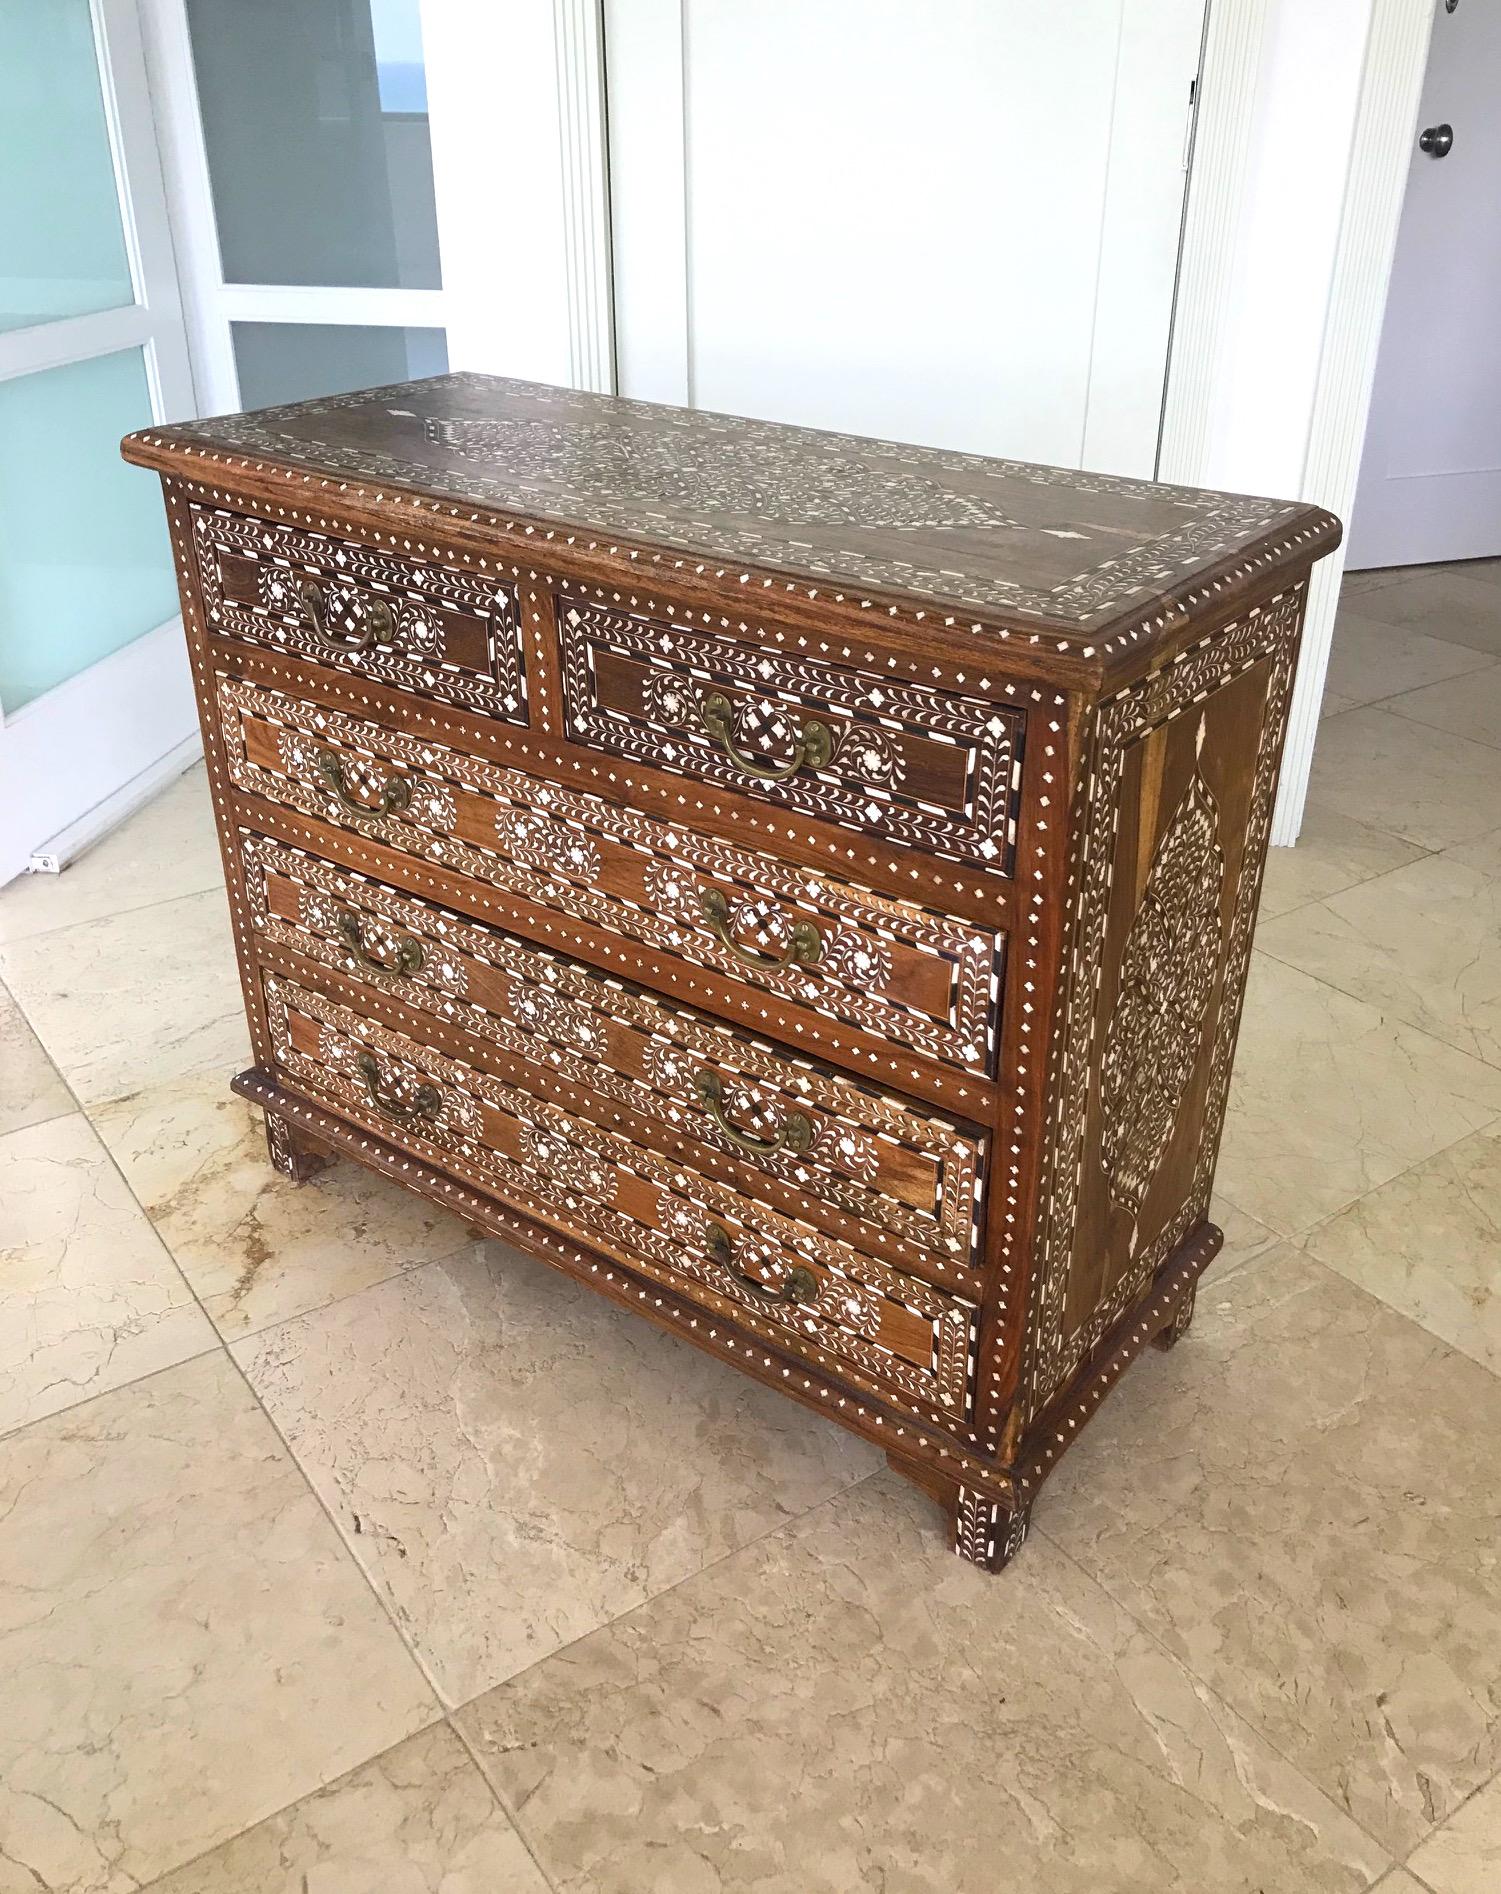 Moroccan Exquisite Chest of Drawers with Bone Inlays and Marquetry Designs, 1970s